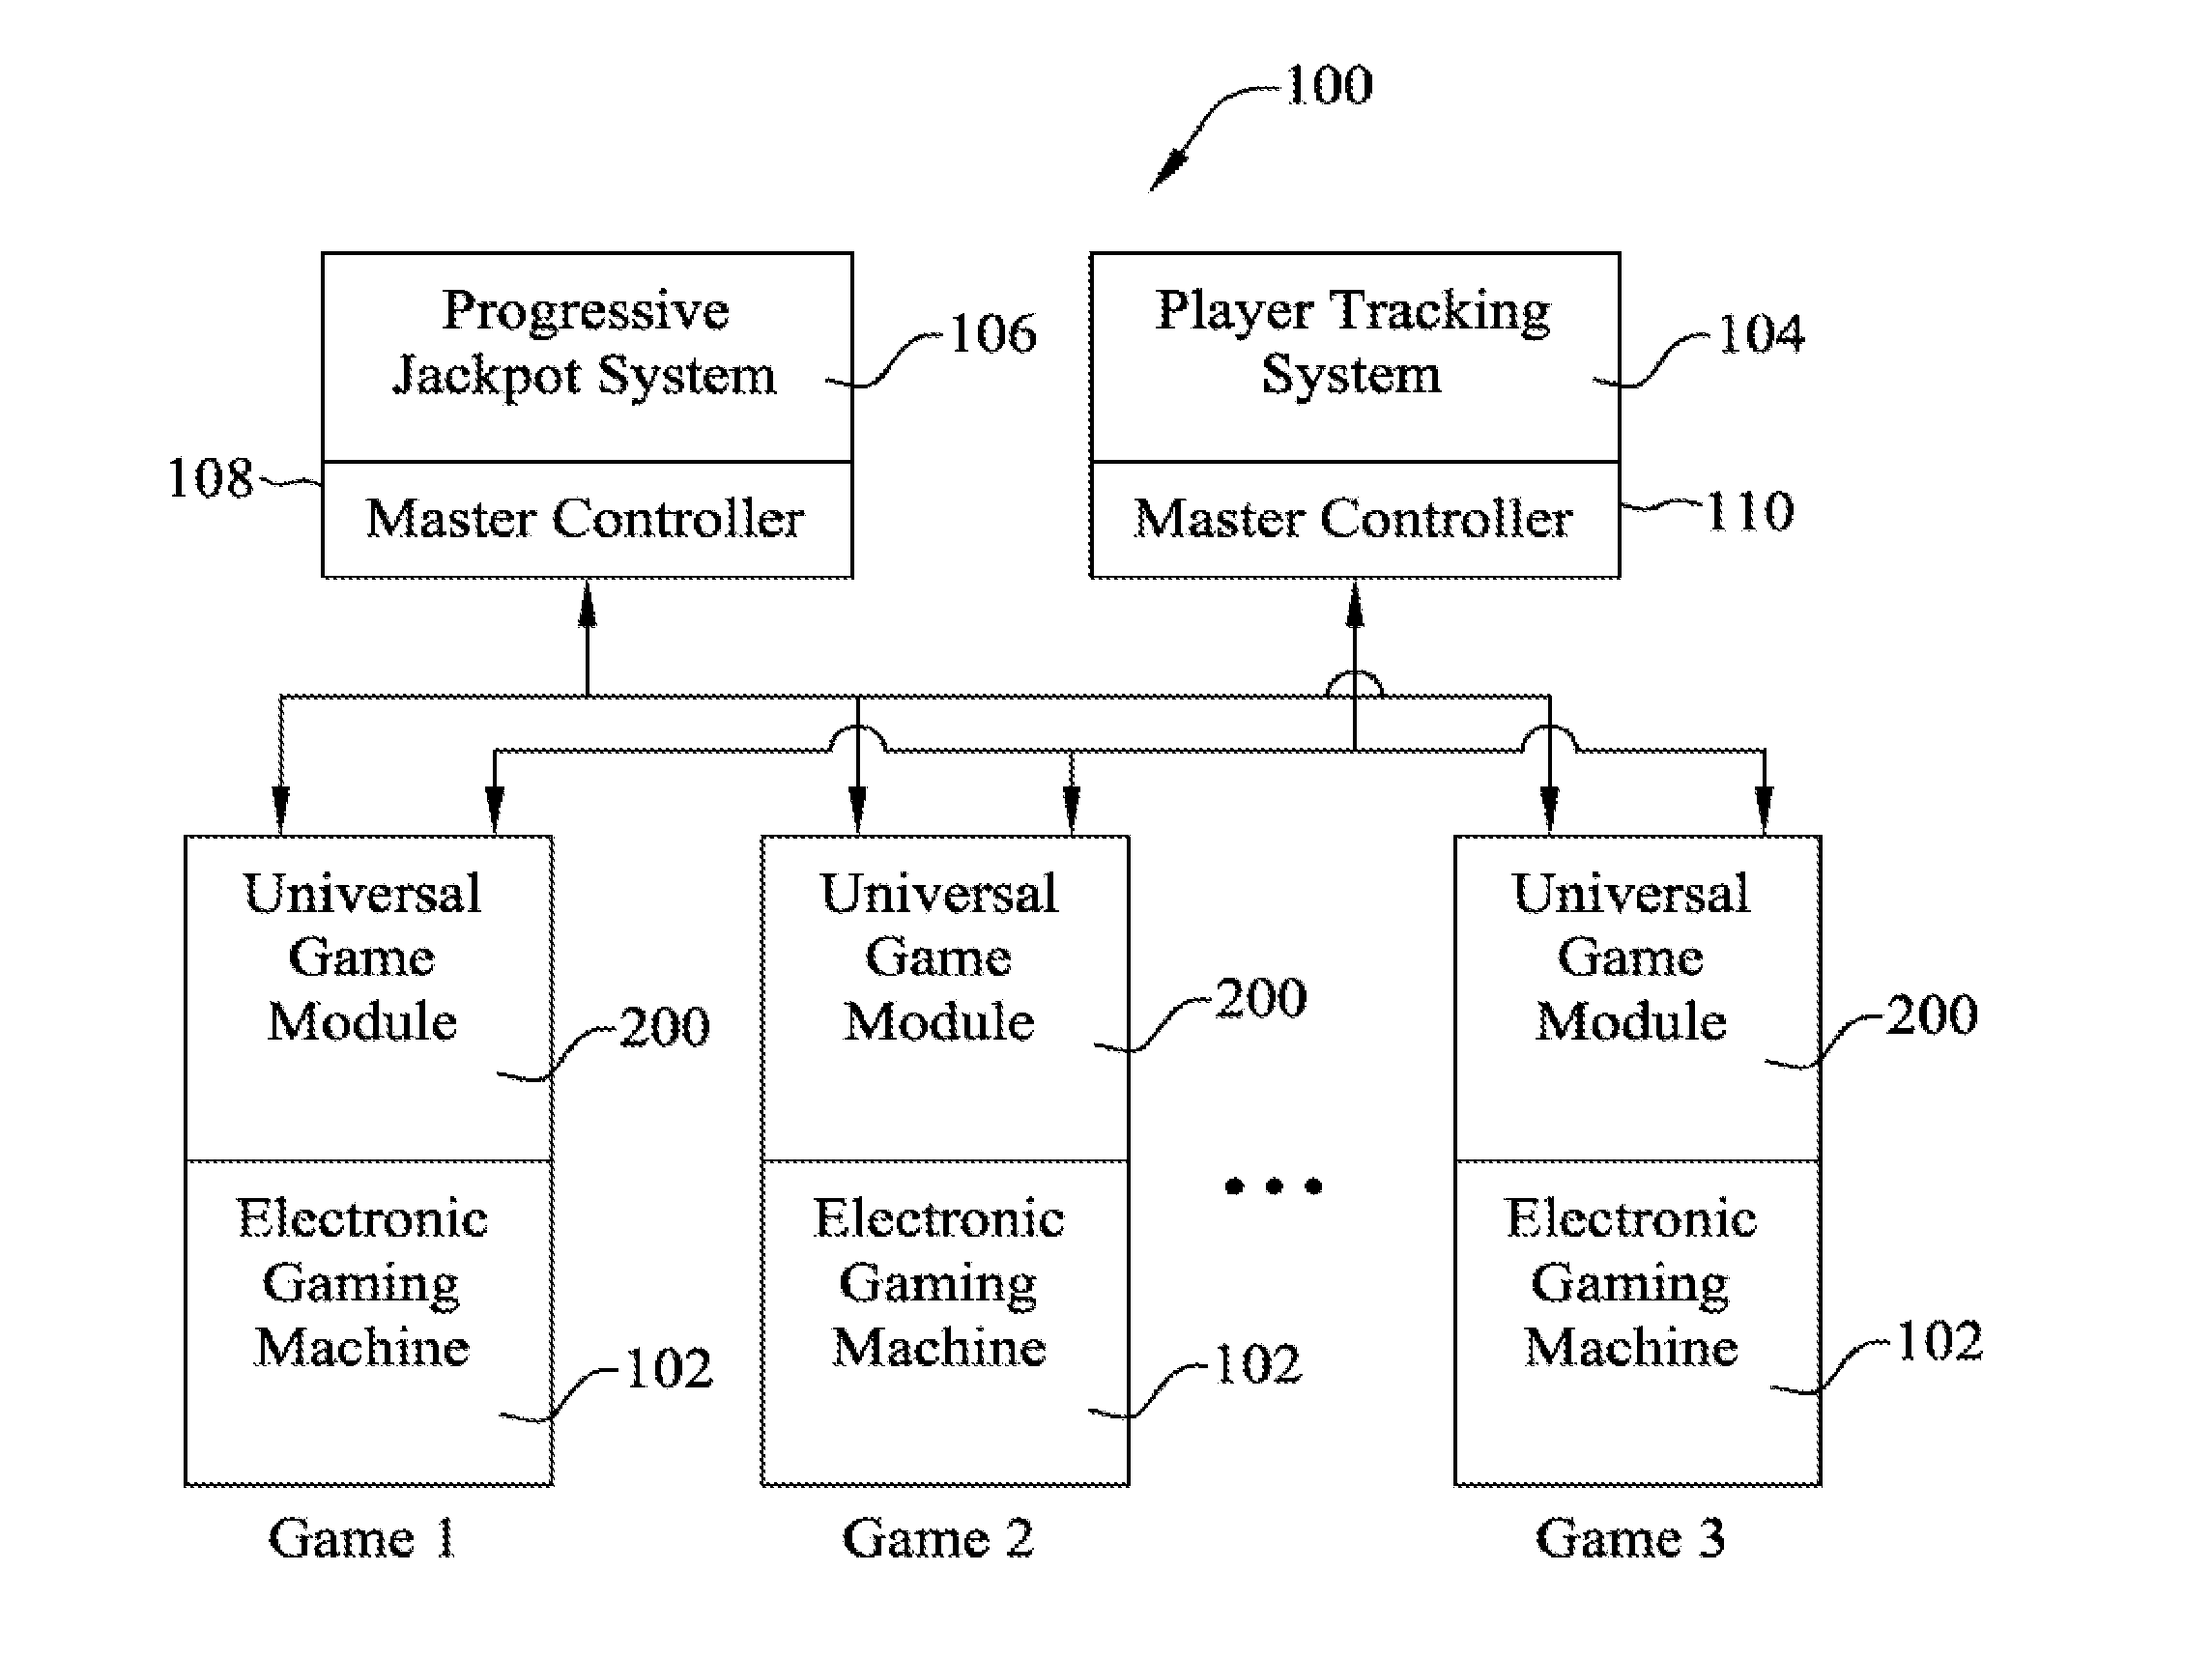 Gaming machine communication with external systems through a single communication port